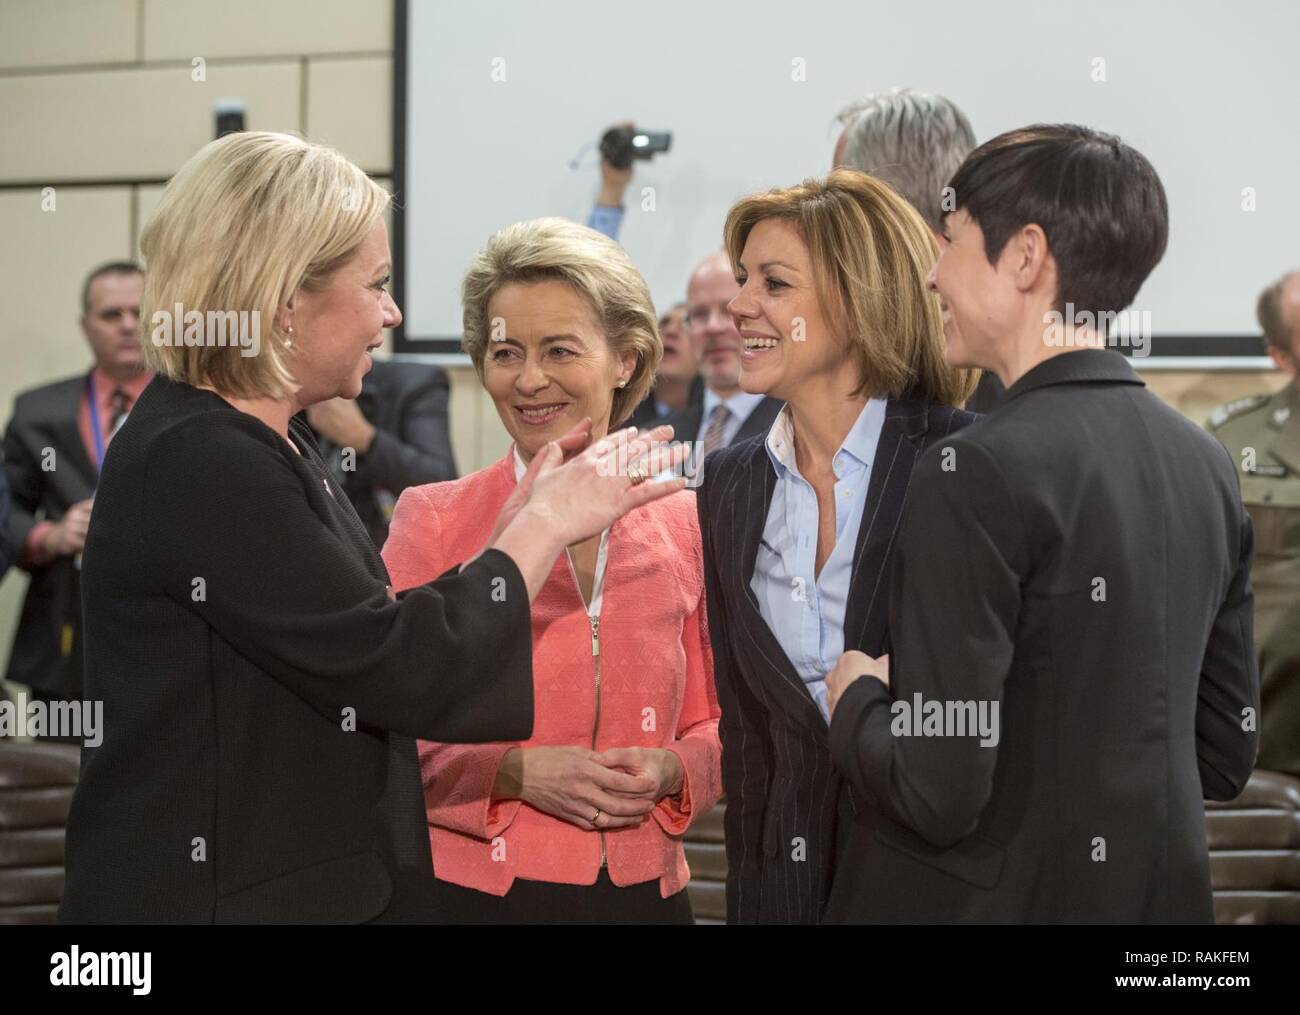 Female ministers of defense talk before a meeting of the North Atlantic Council the NATO Headquarters in Brussels, Belgium, Feb. 15, 2017. From left to right are Jeanine Hennis-Plasschaert (Netherlands), Ursula von der Leyen (Germany), Maria Dolores de Cospedal Garcia (Spain) and Ine Marie Eriksen Soreide. Stock Photo